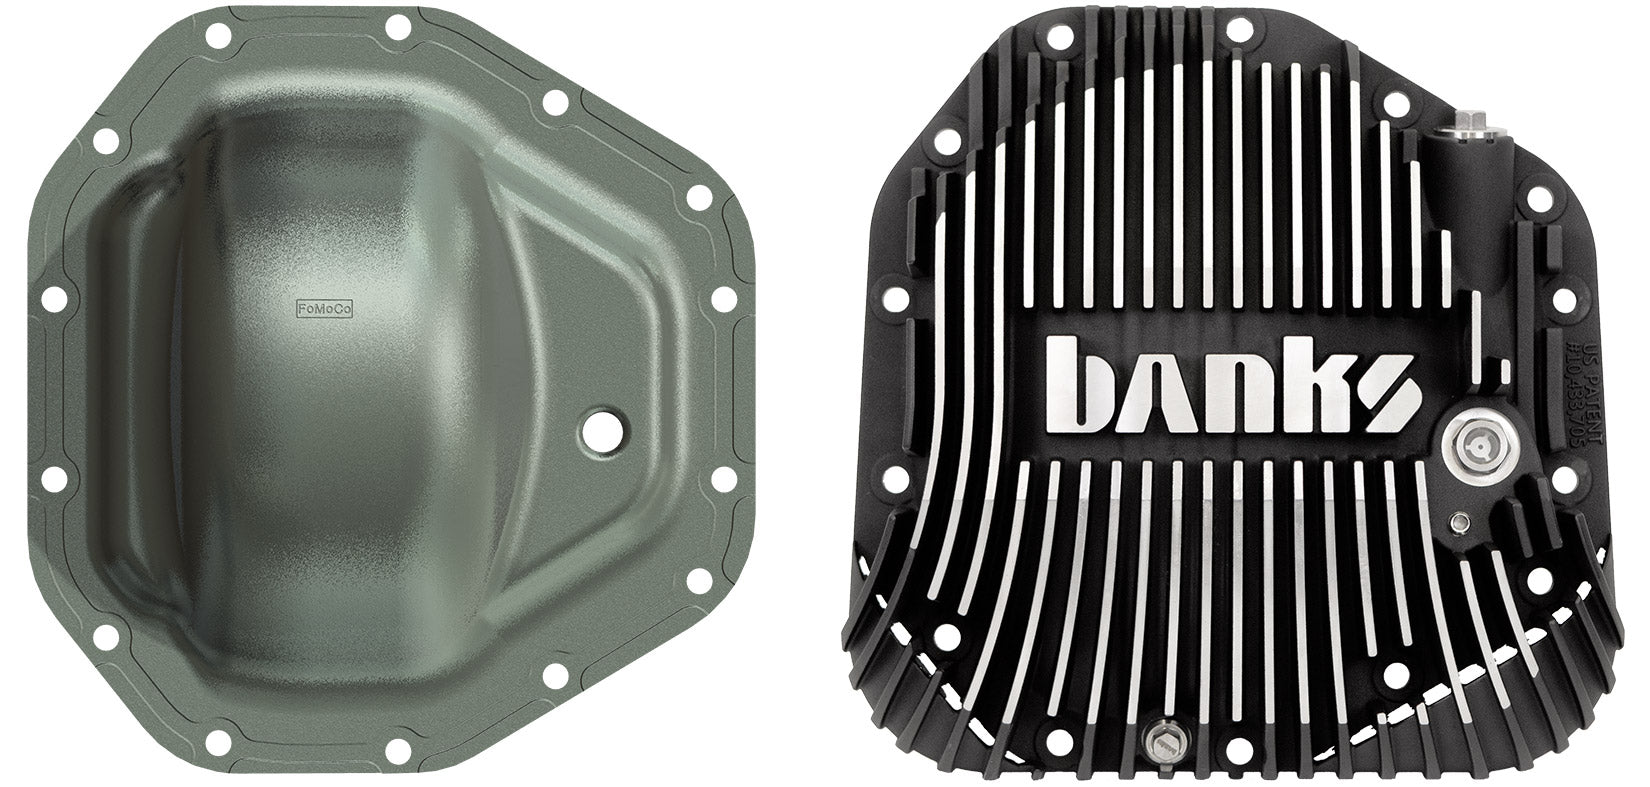 Picture comparing the size of the OEM differential cover vs Banks Ram-Air cover